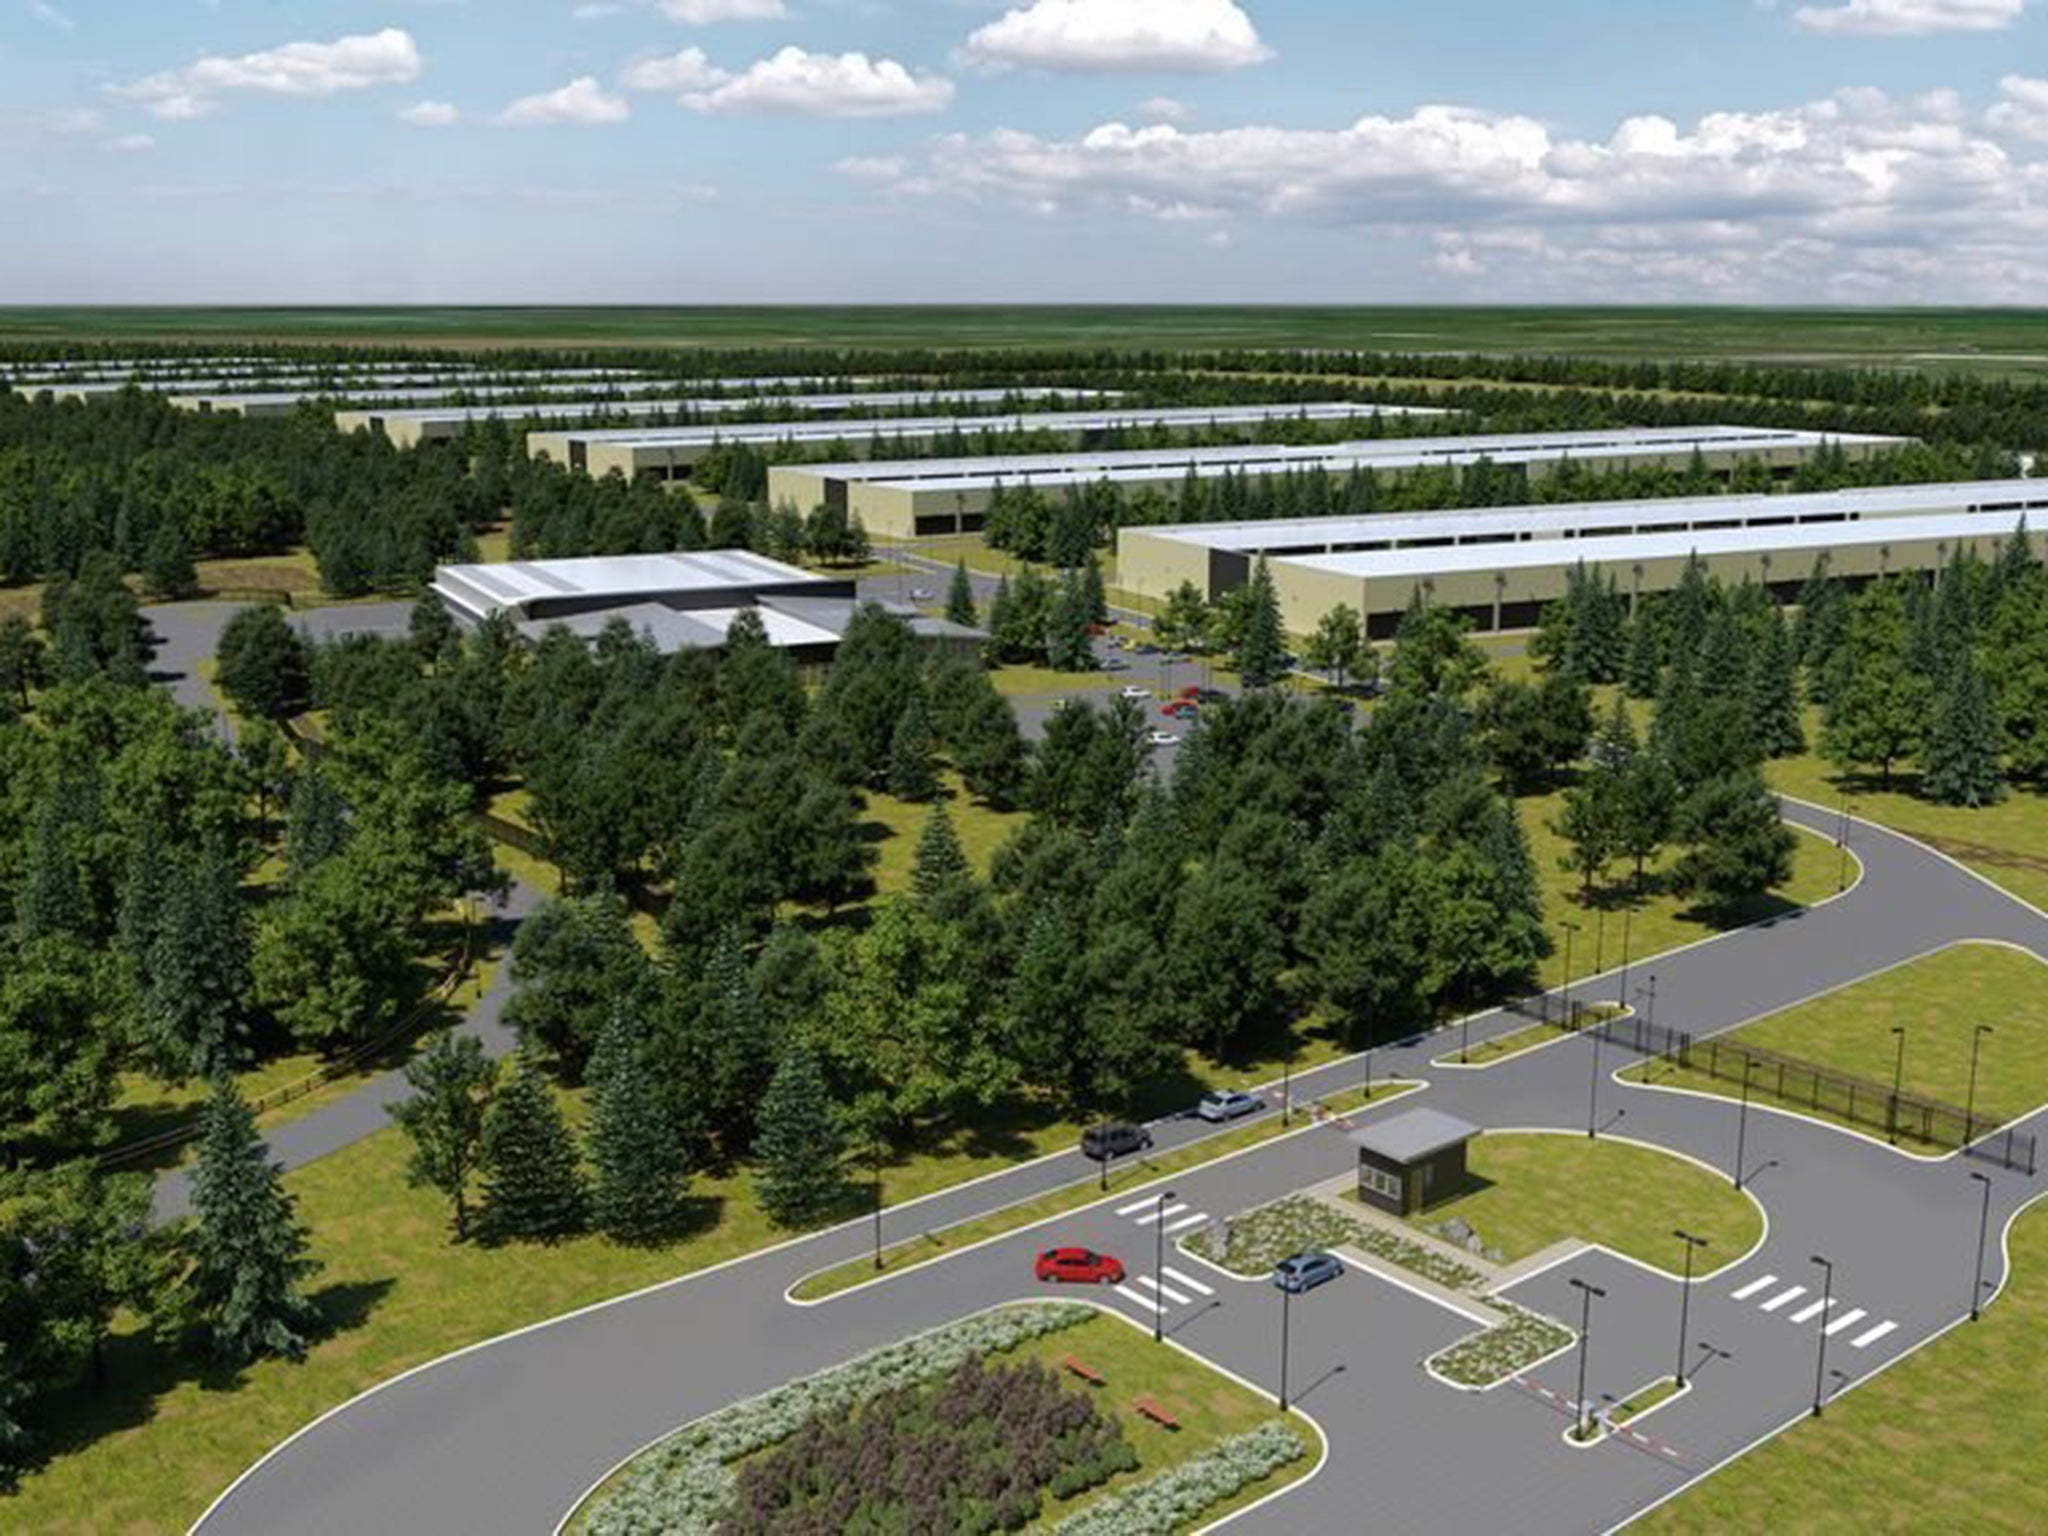 This is a computer-generated image of what Apple's data centre could look like when finished.